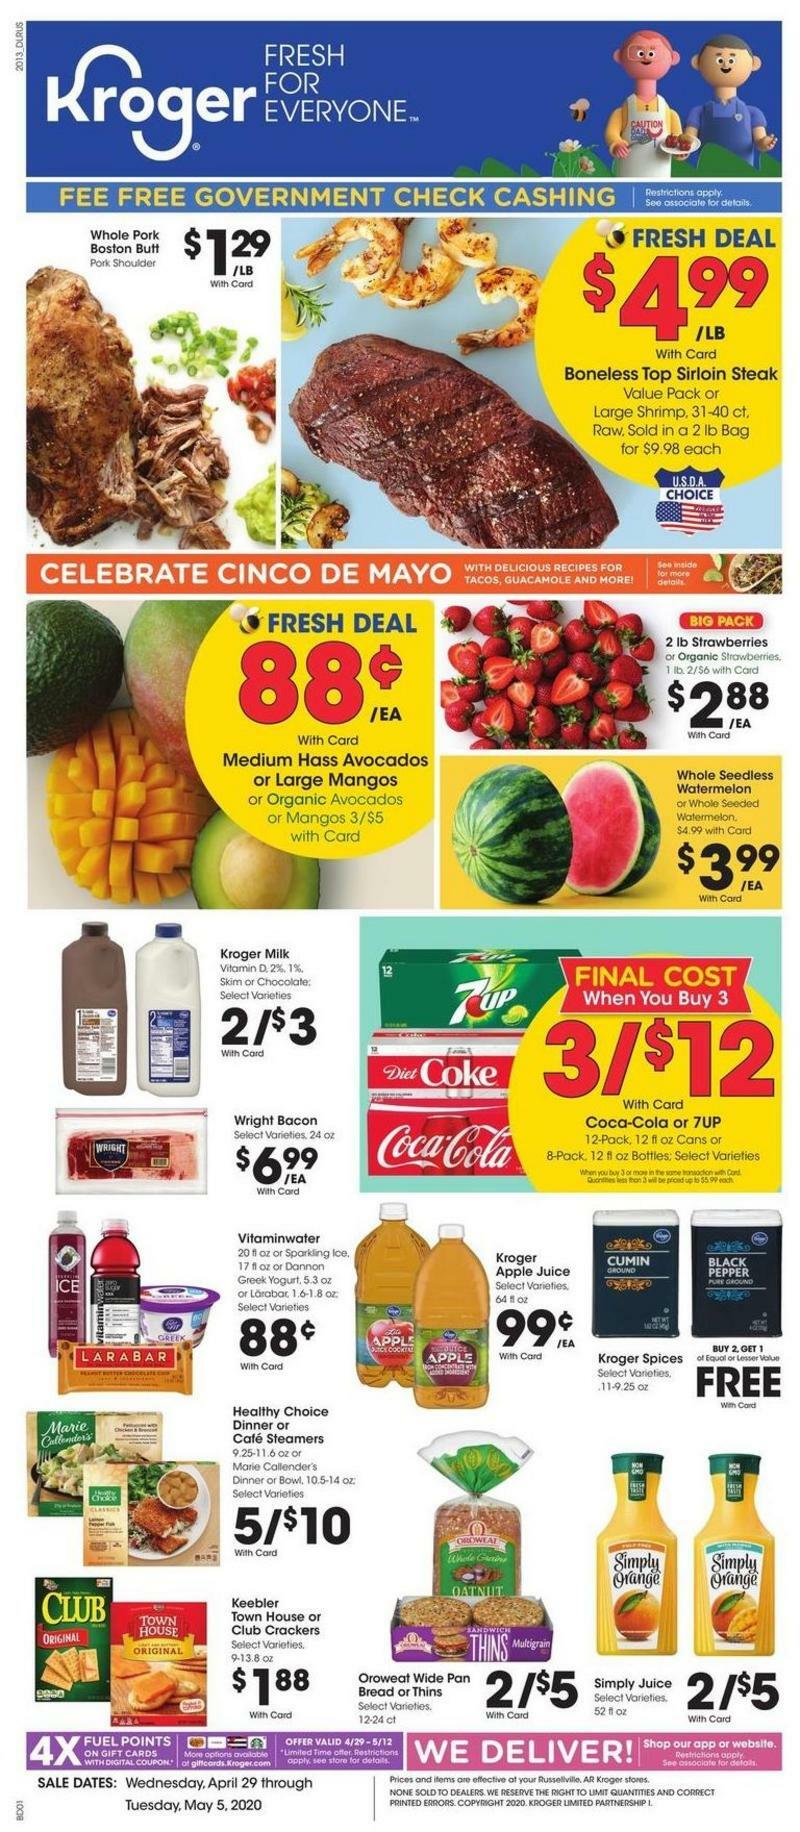 Kroger Weekly Ads & Special Buys from April 29